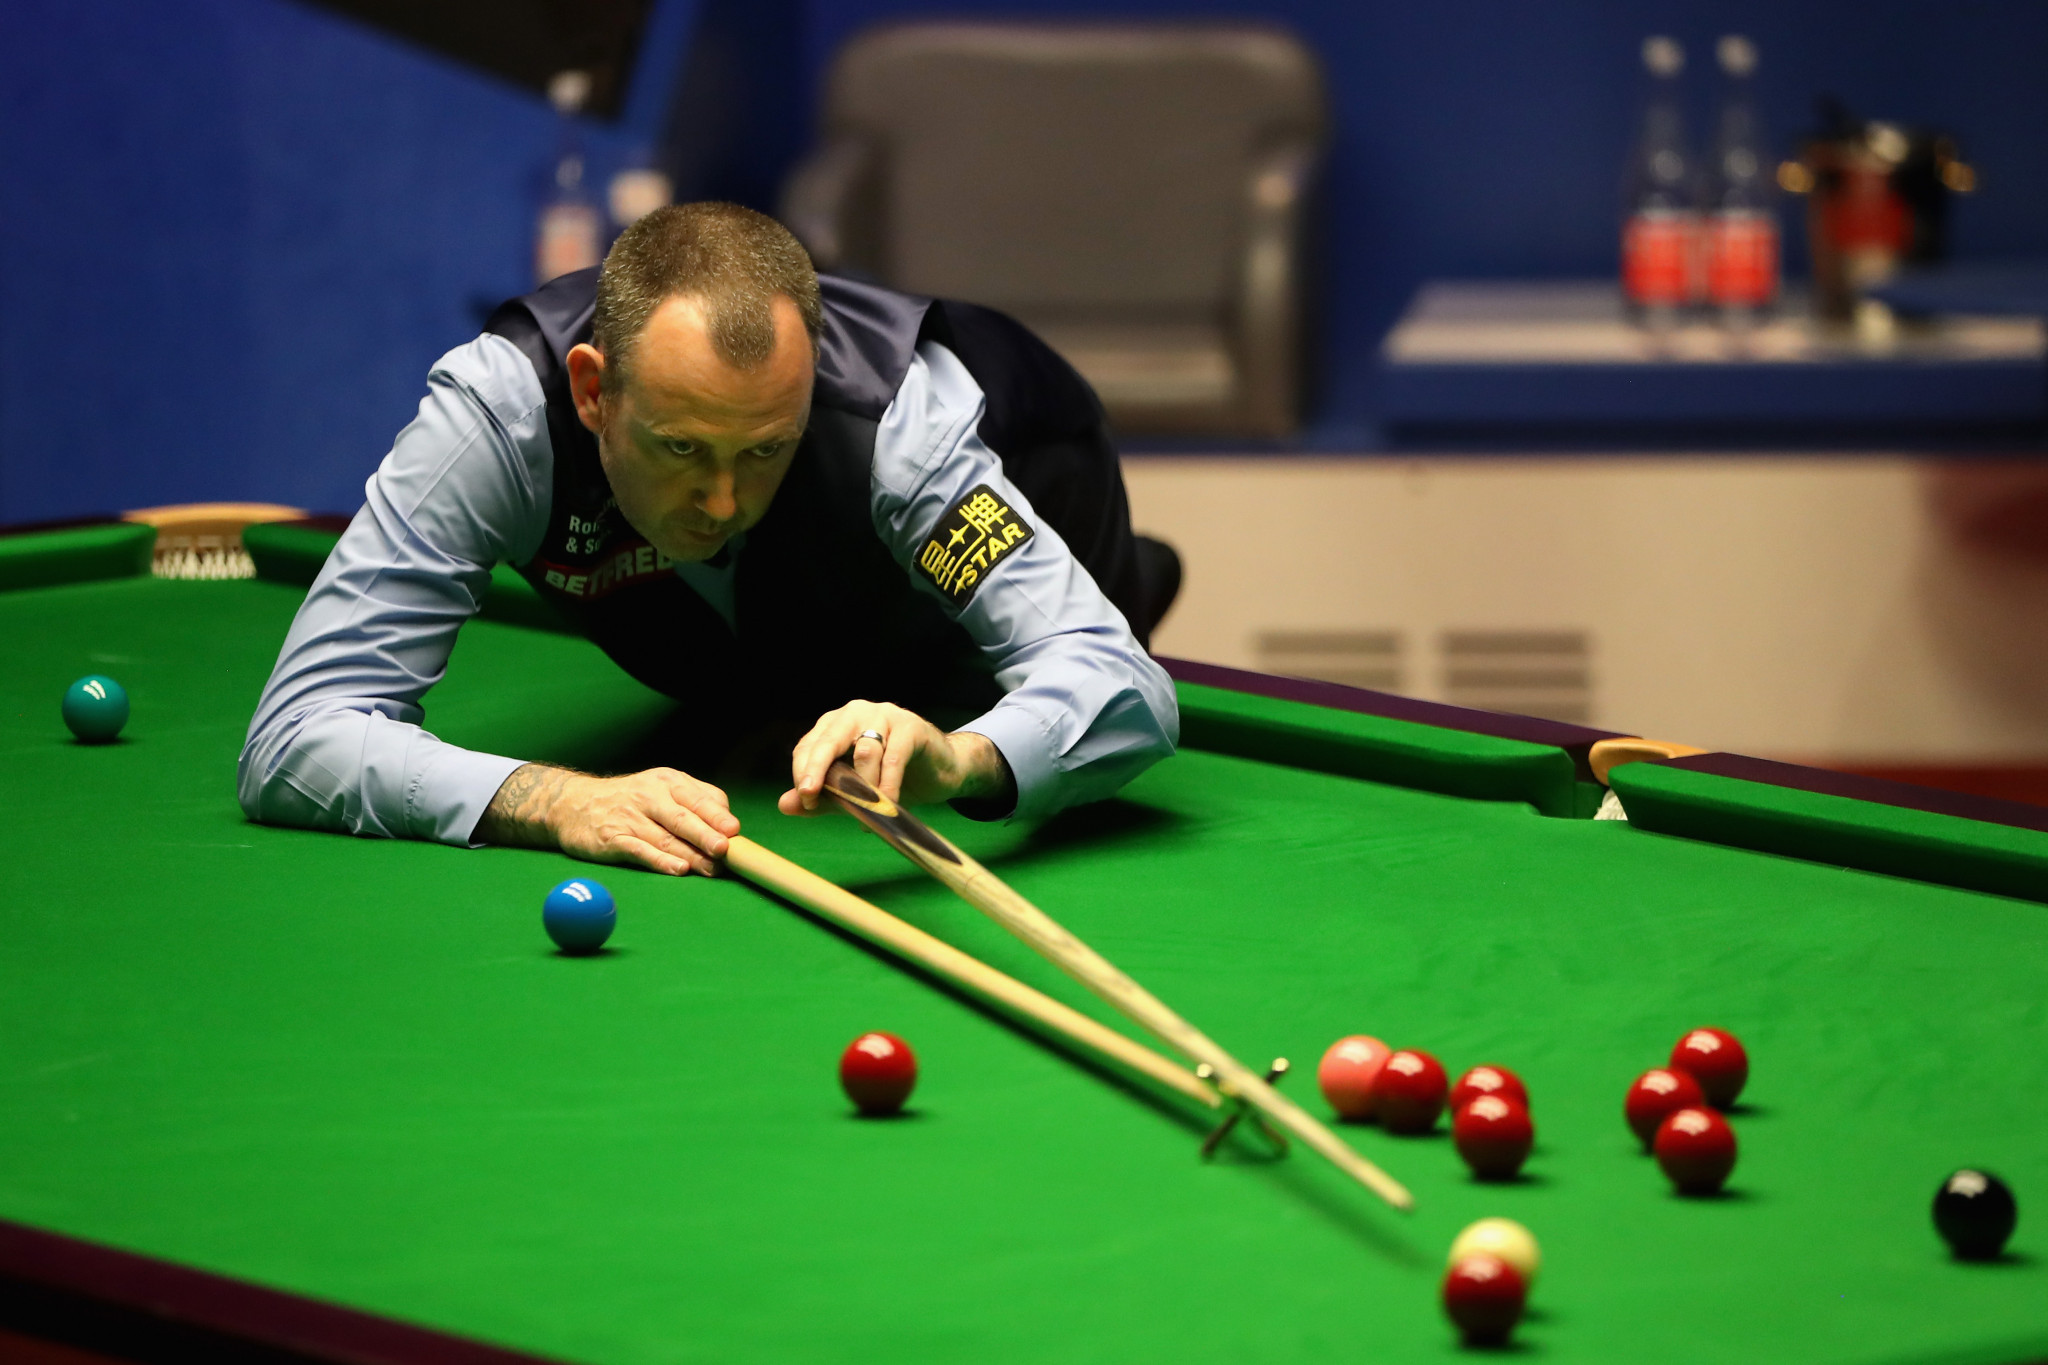 Wales' Mark Williams resumed his World Snooker Championship title defence today after hospital tests following chest pains - but eventually lost his second round match against David Gilbert ©Getty Images